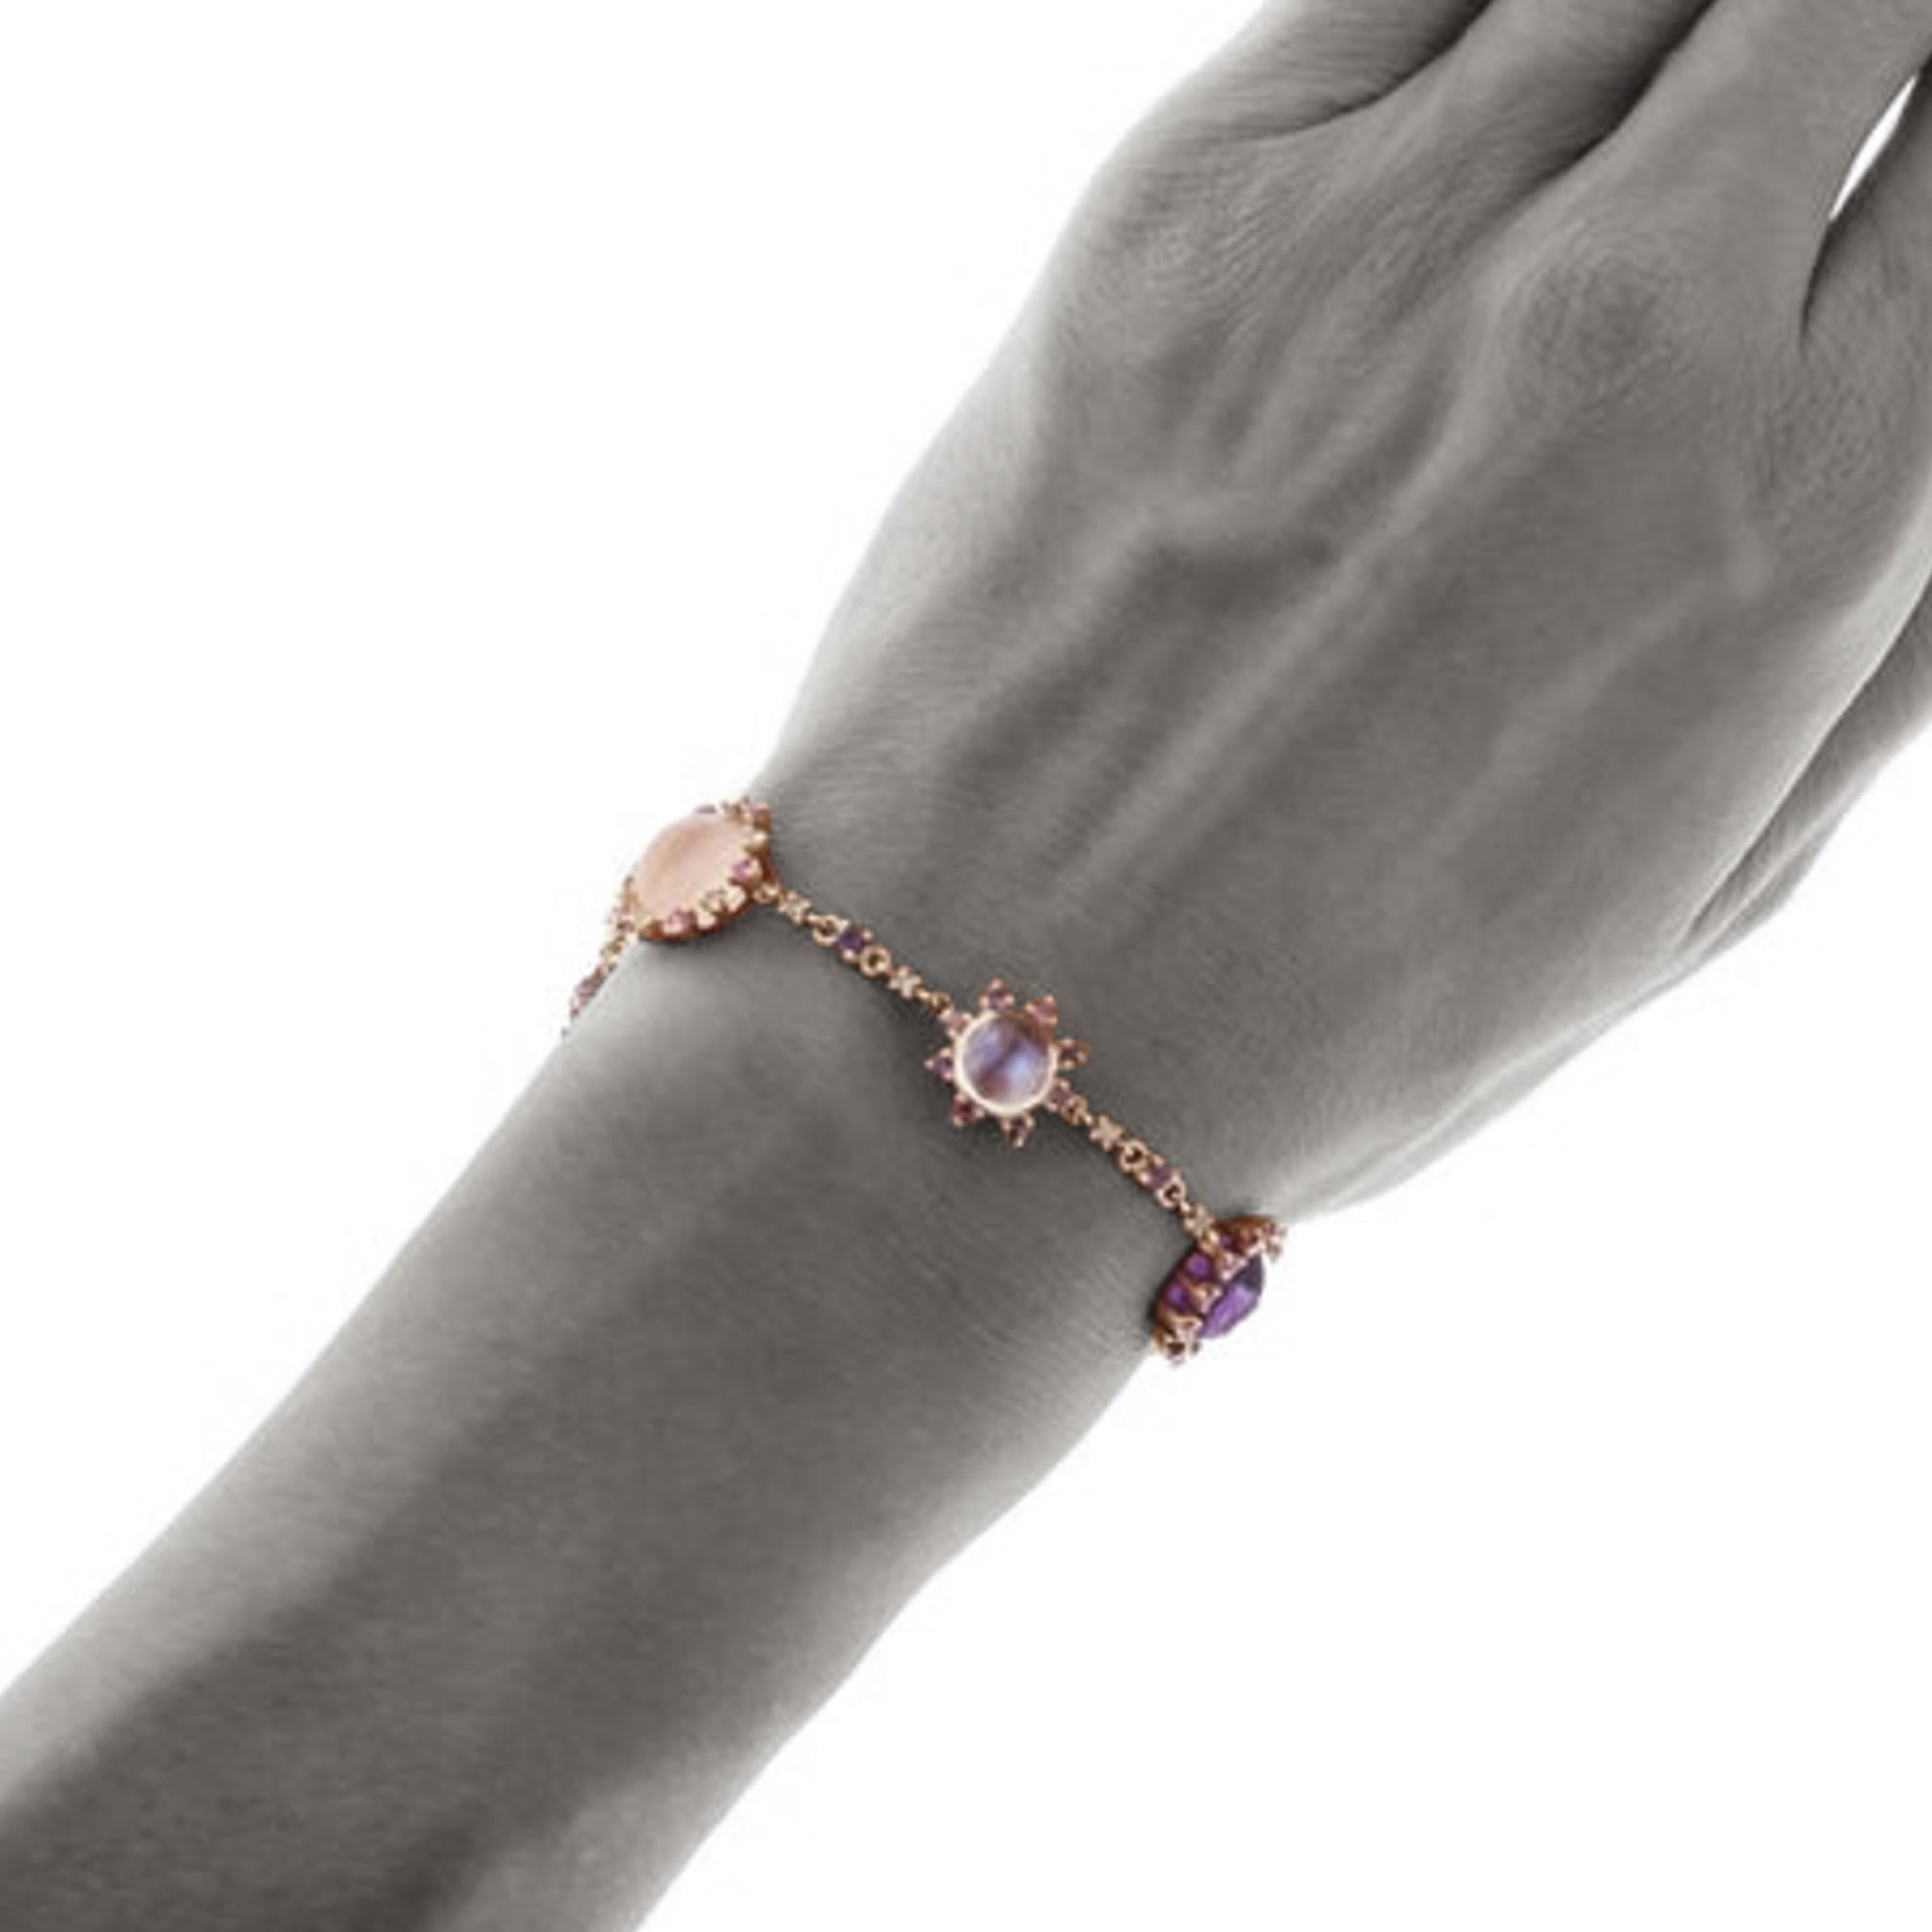 Alex Jona design collection, hand crafted in Italy, 18 karat rose gold link bracelet, consisting of six flower links set with pink sapphires and brown diamonds, centering two cabochon moonstones, two cabochon amethysts and two cabochon rose quartz.